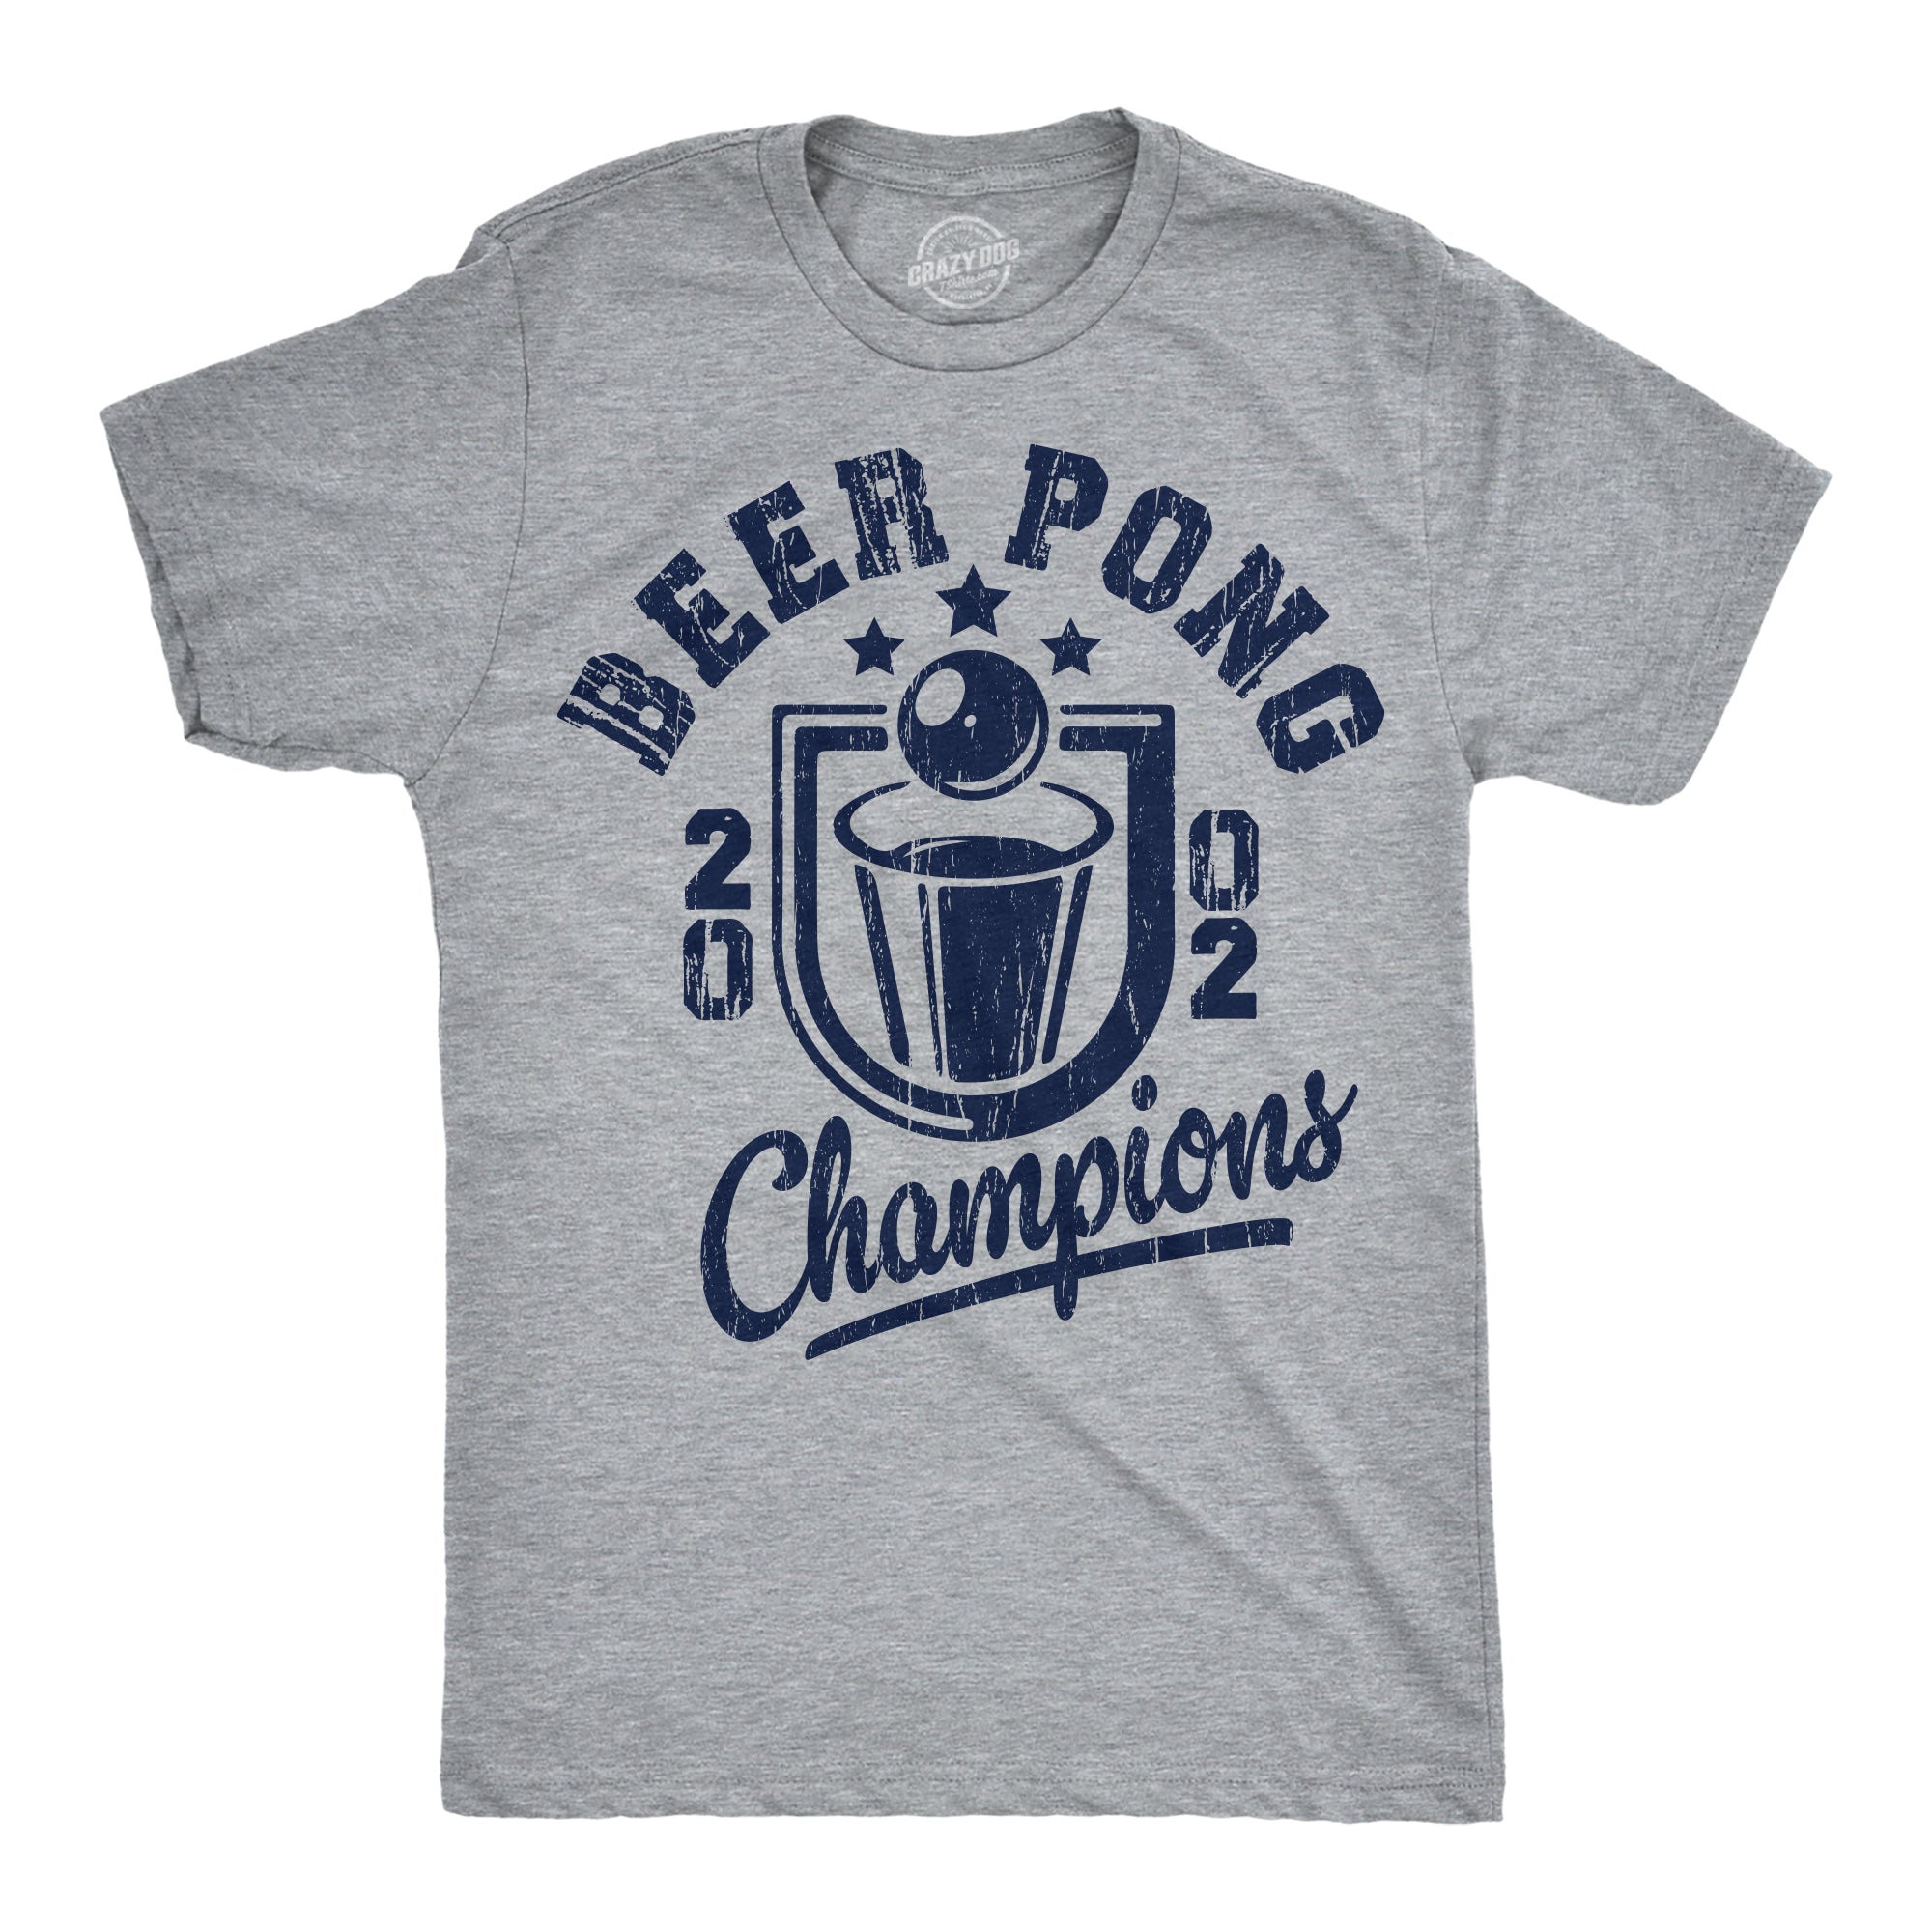 Funny Light Heather Grey - Beer Pong Champions Beer Pong Champions Mens T Shirt Nerdy Drinking Beer sarcastic Tee